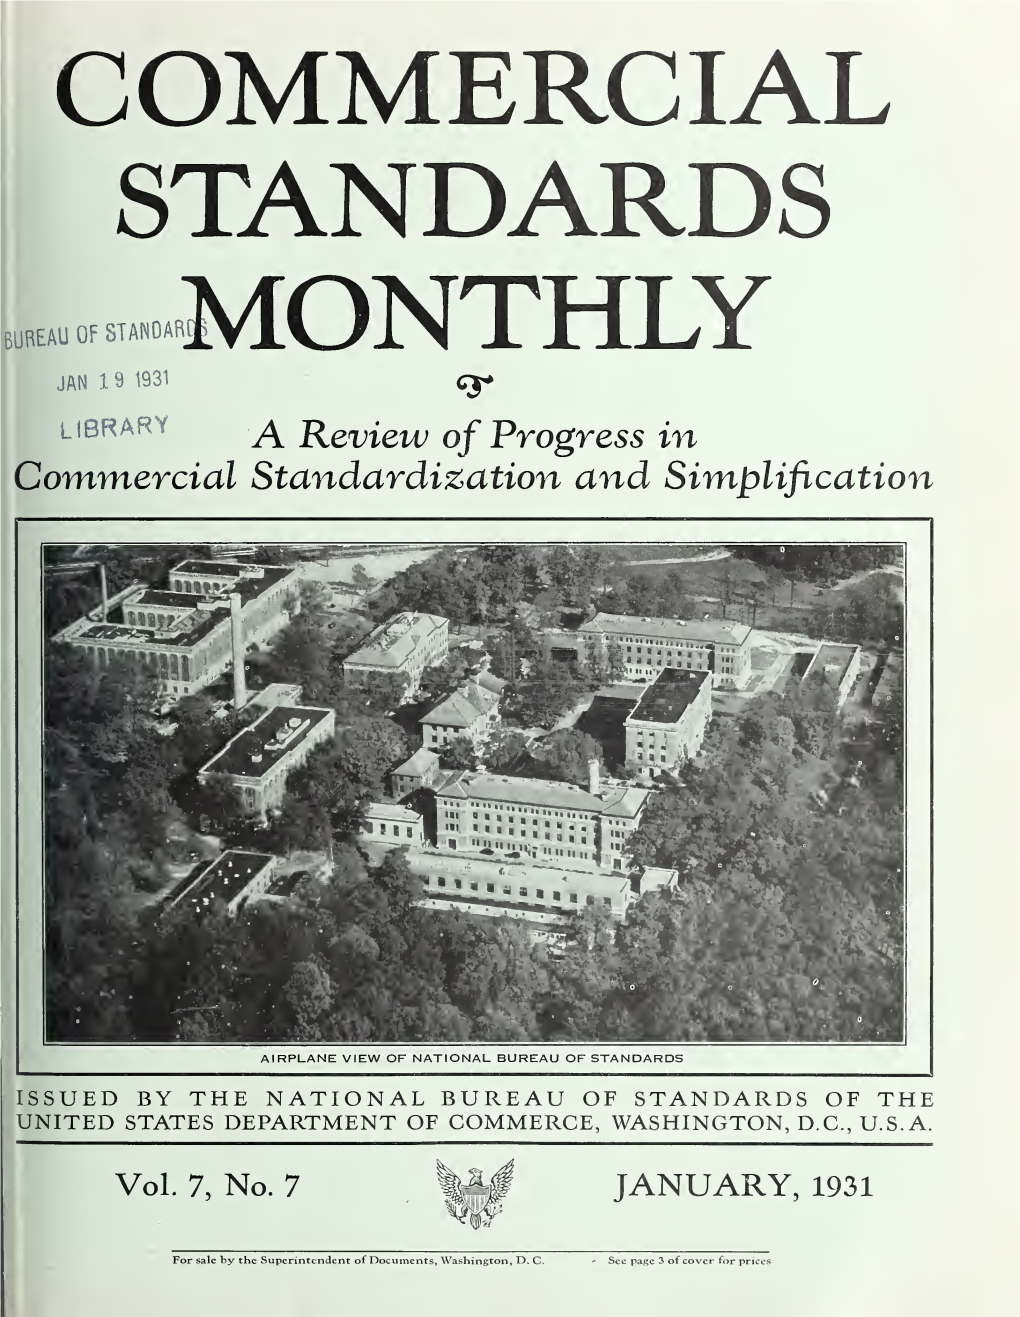 A Review of Progress in Commercial Standardization and Simplification